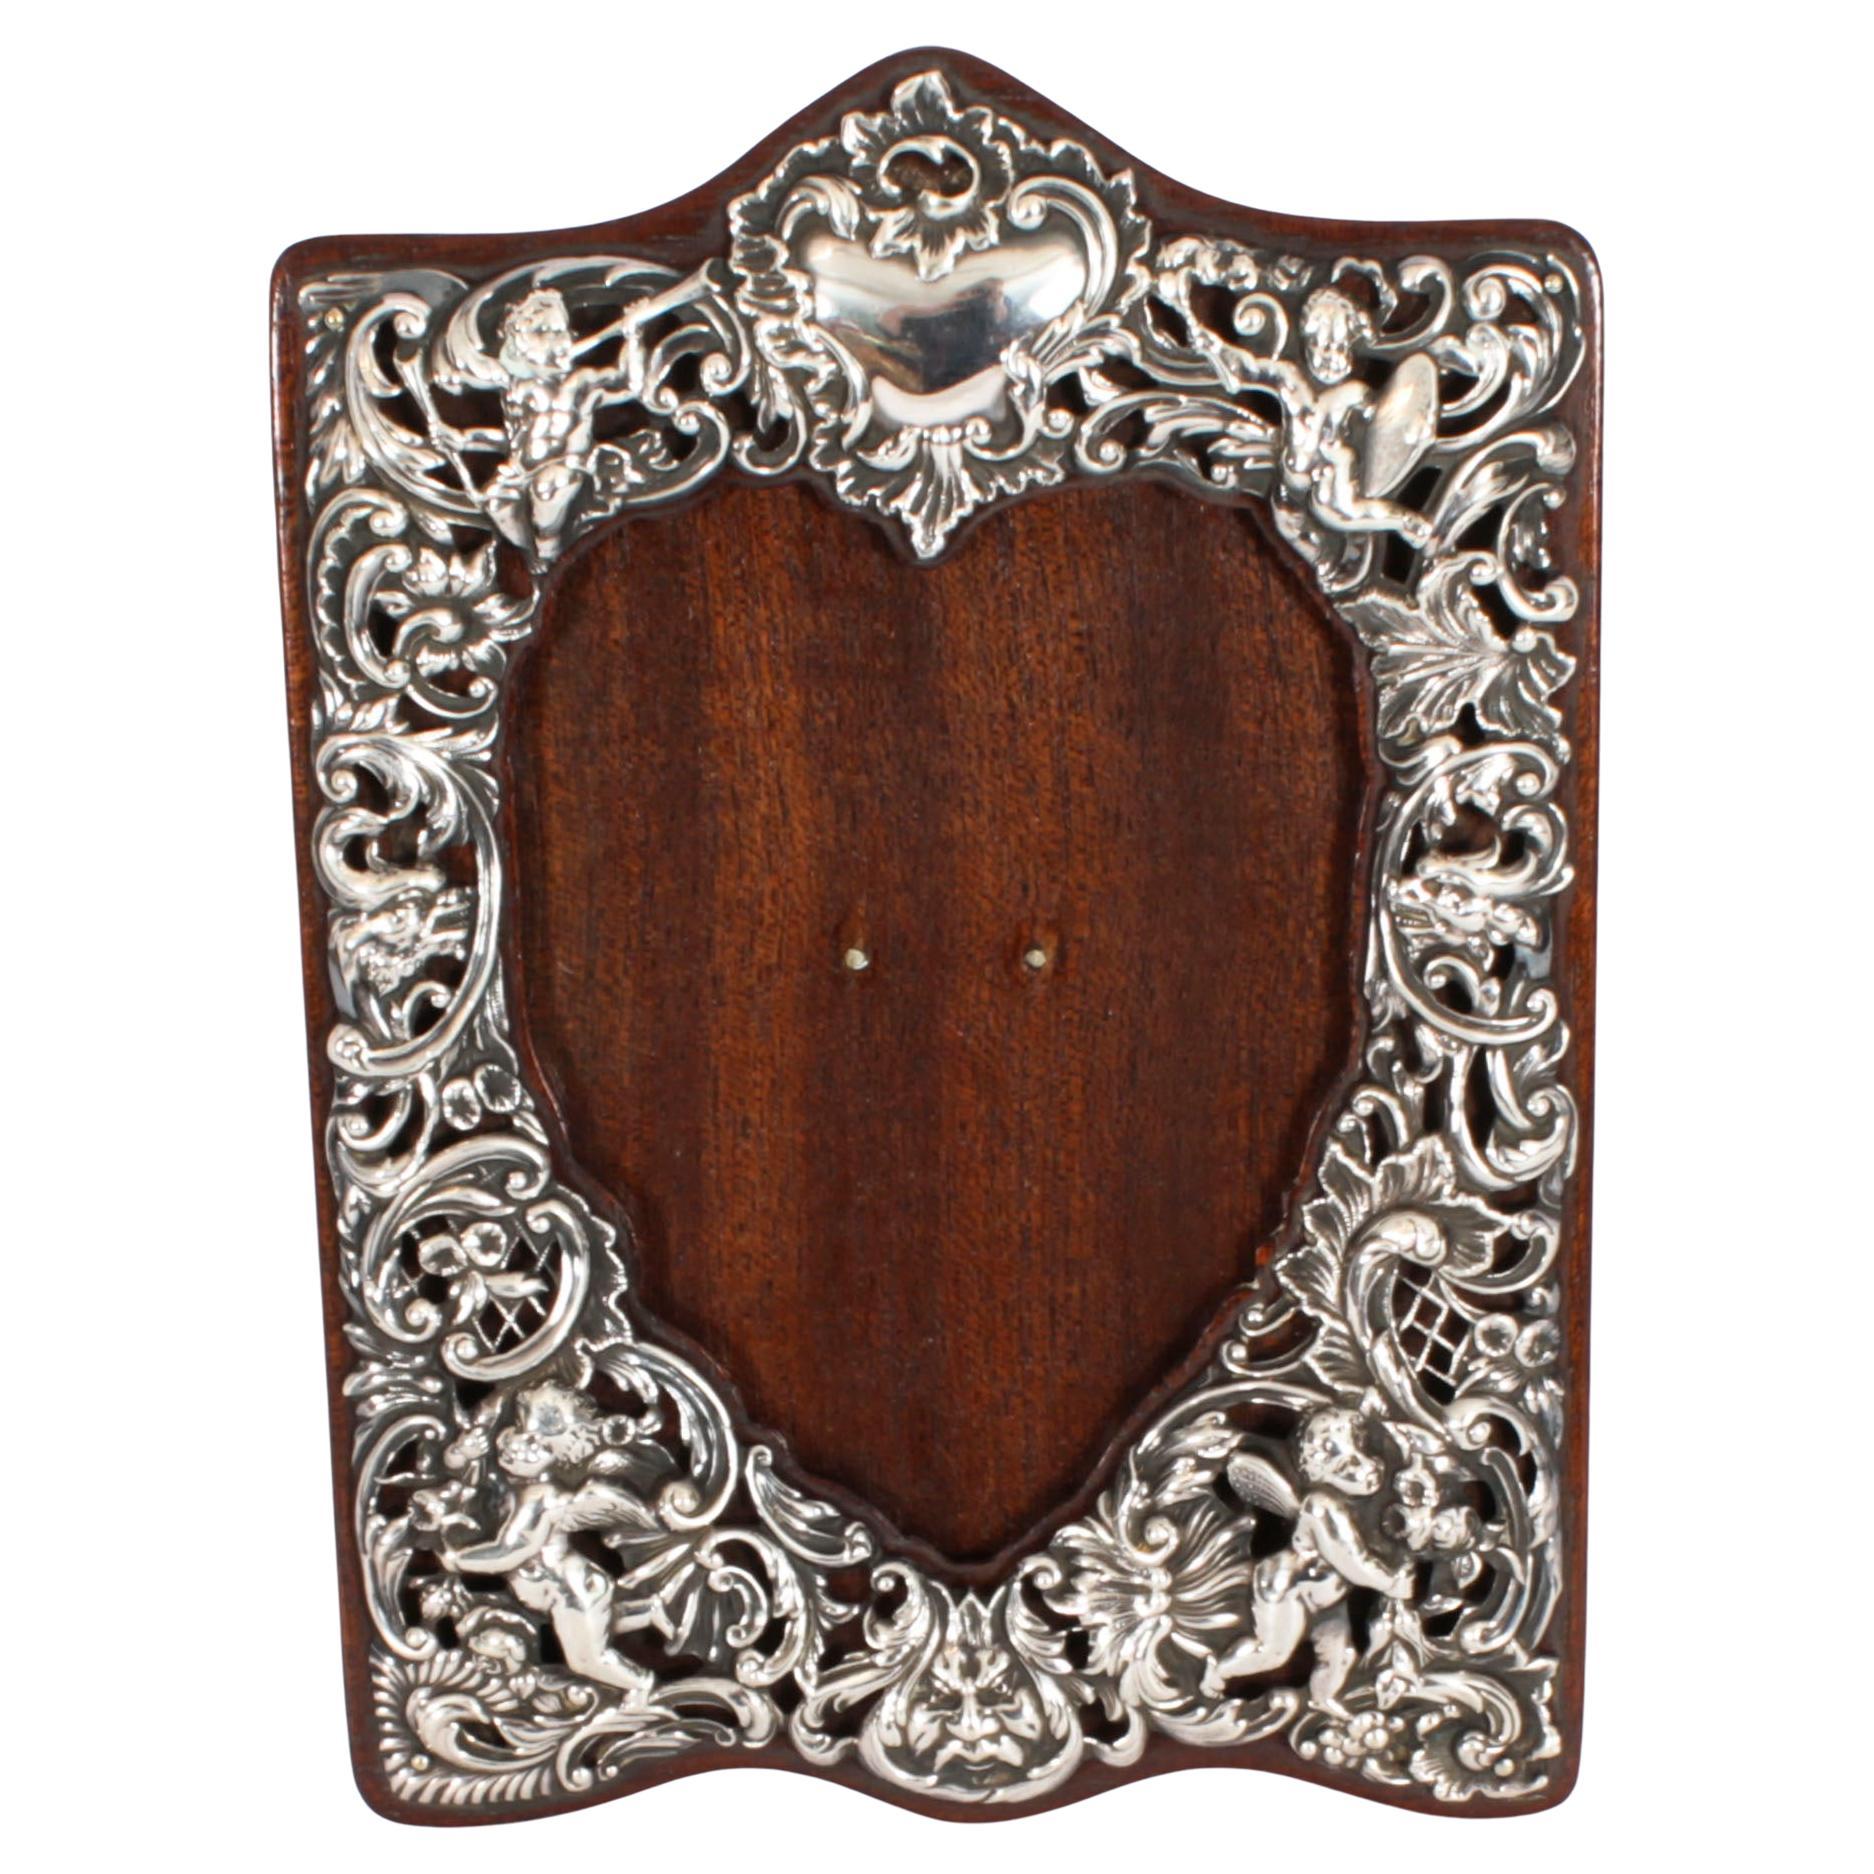 Antique Edwardian Sterling Silver Photo Frame Dated 1911 20x14cm